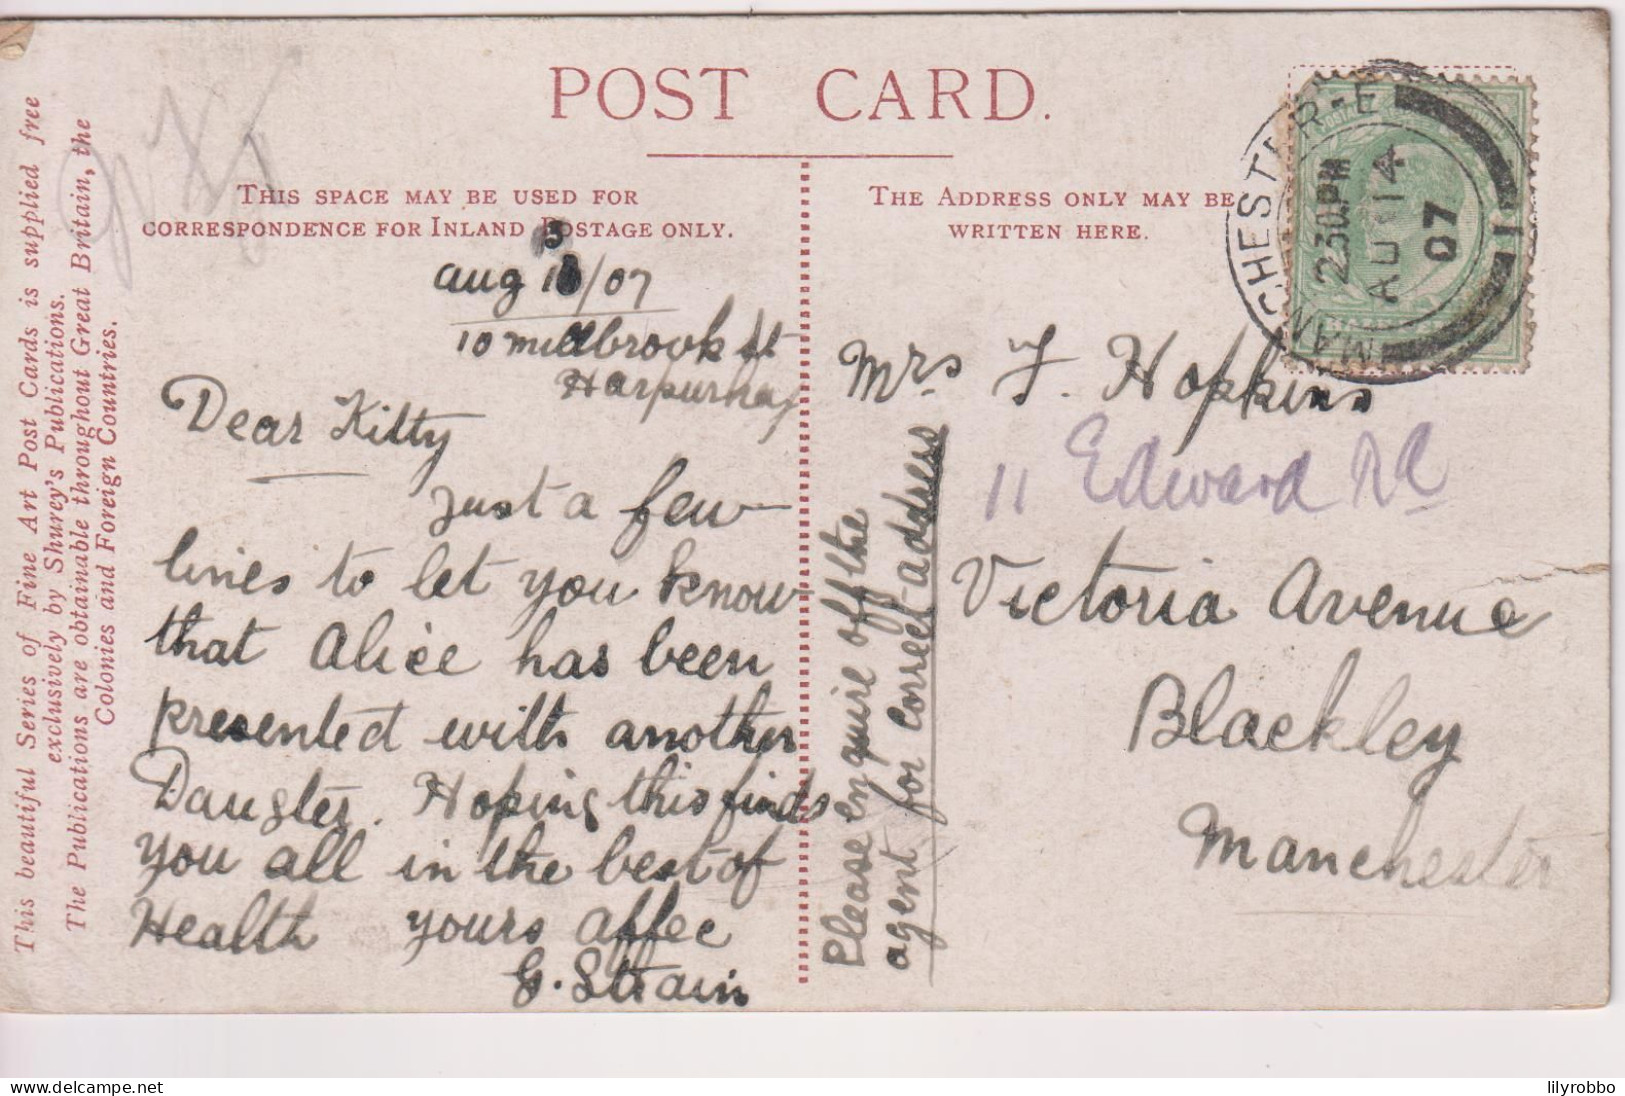 UK - Scotland - Forth (Railway) Bridge With Ferry In The Foreground Etc - Manchester UK Postmark 1907 - Structures